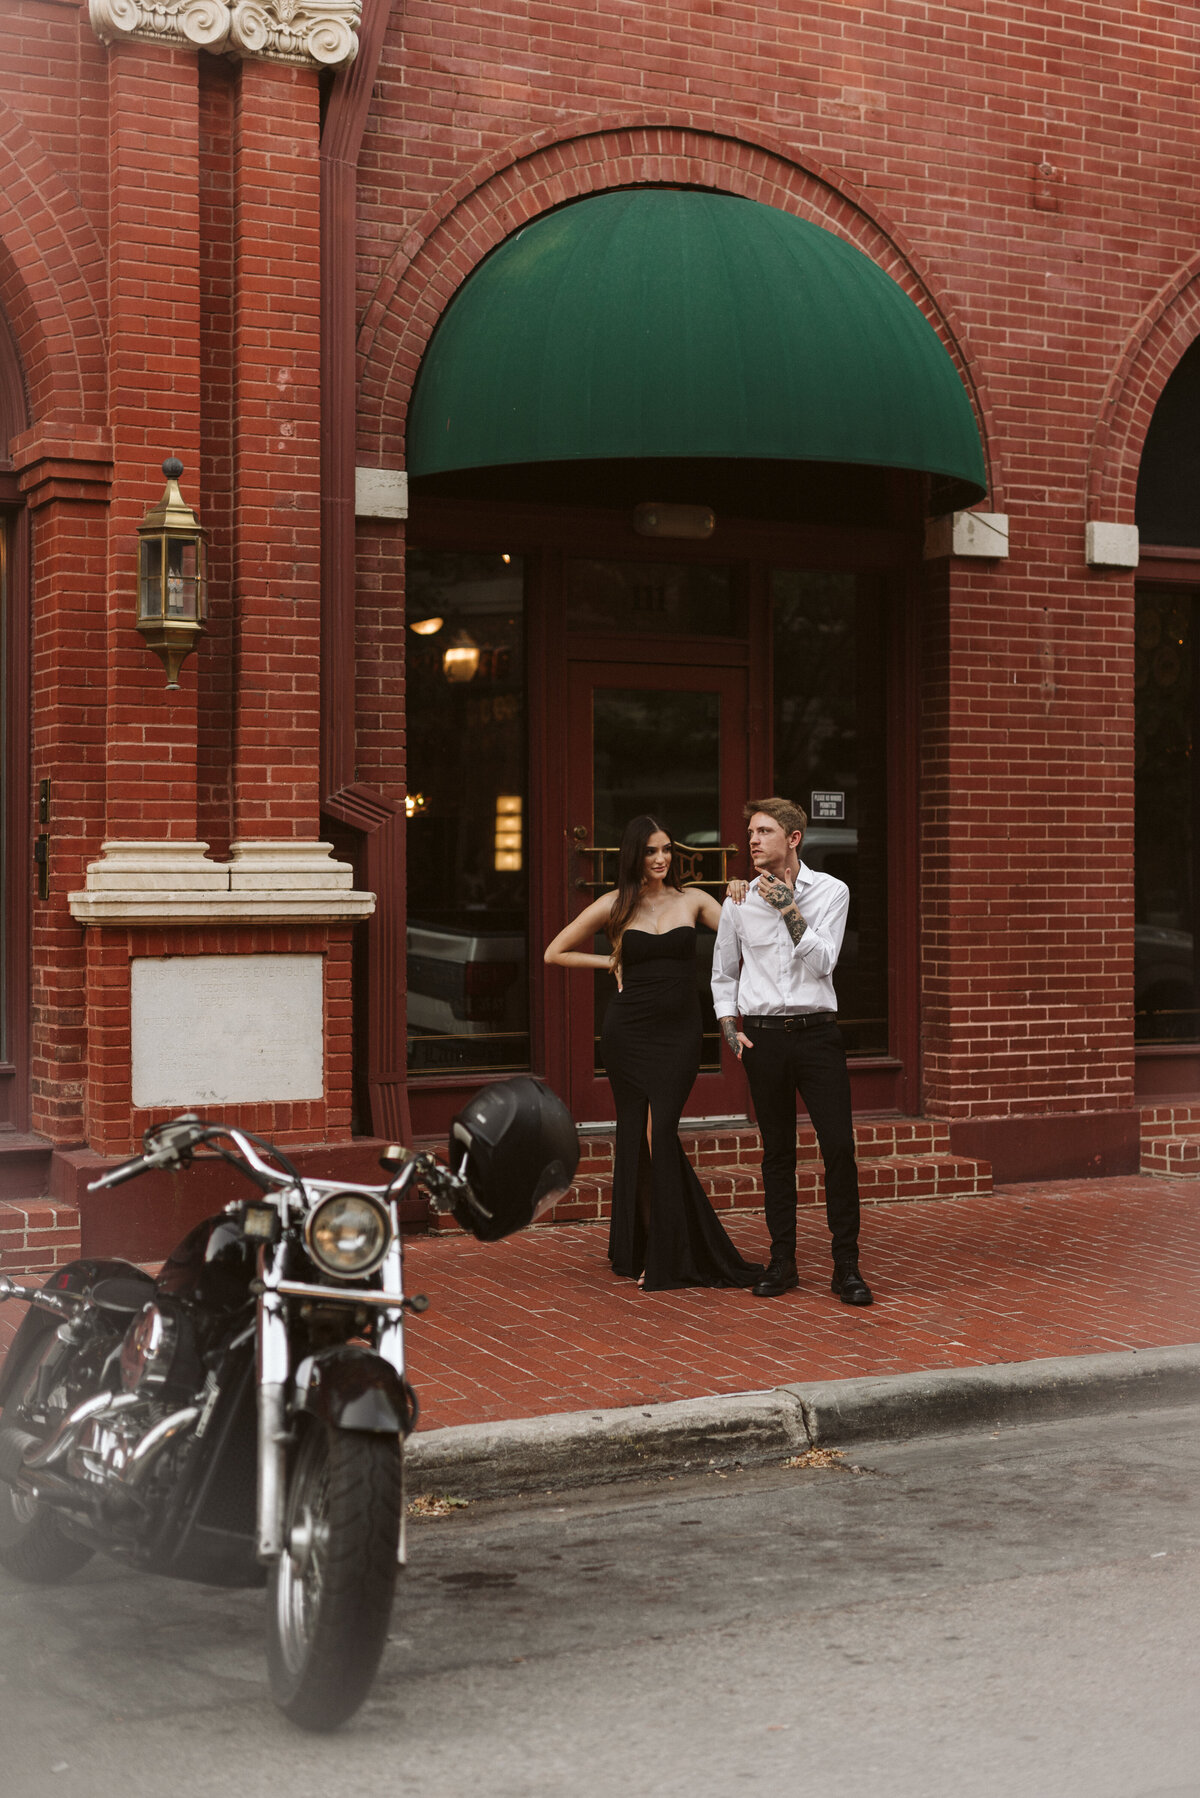 Natalie-and-Codi-engagement-session-at-sundance-sqaure-fort-worth-by-bruna-kitchen-photography-24